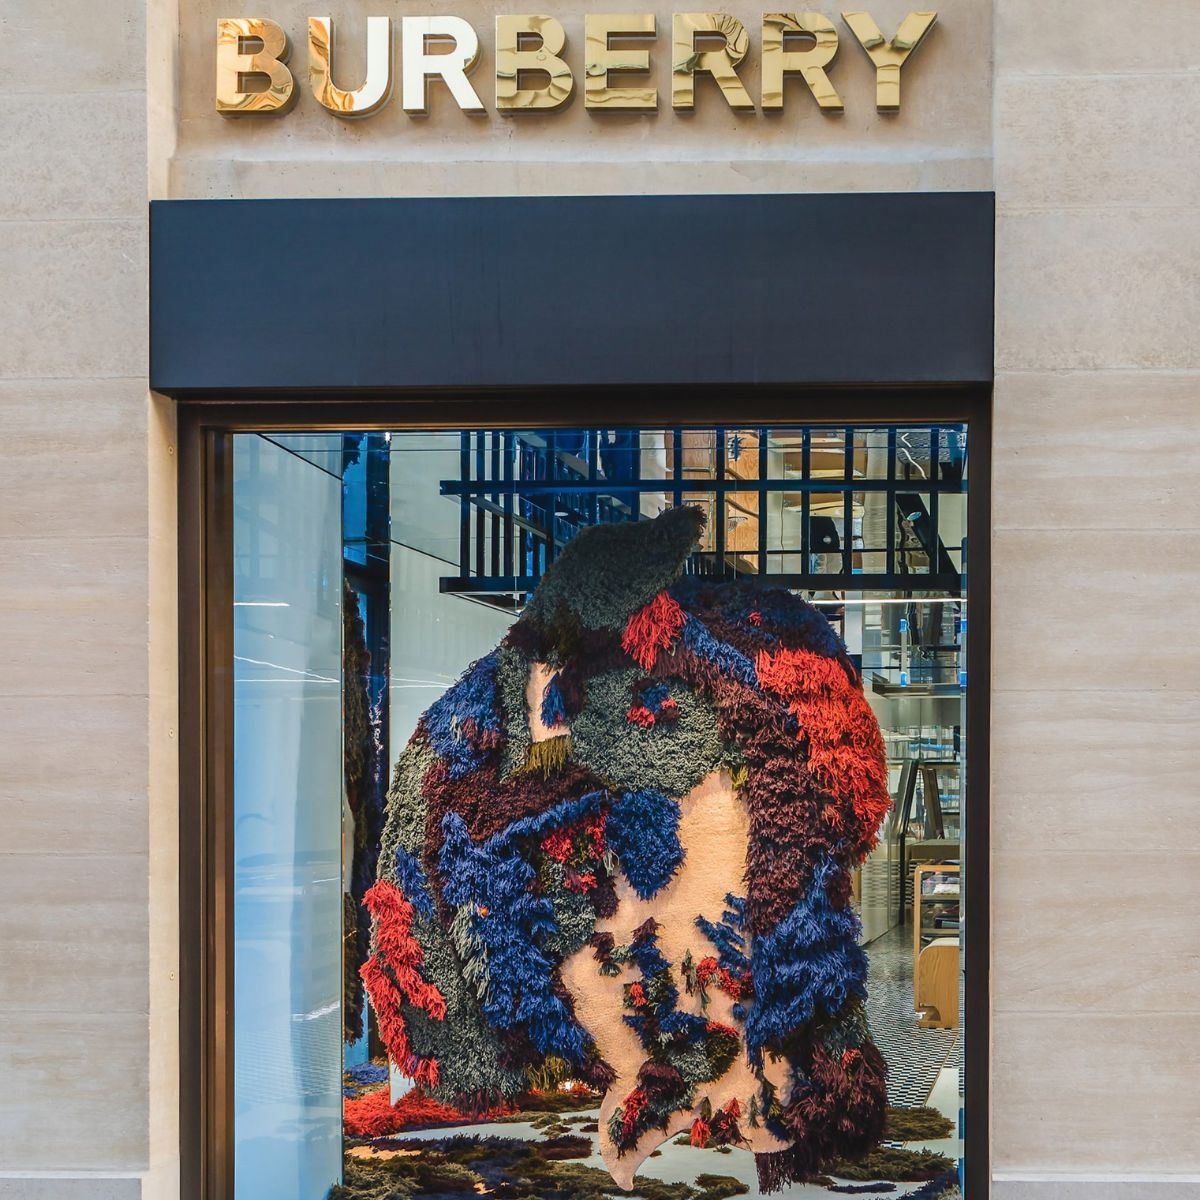 Burberry store featured